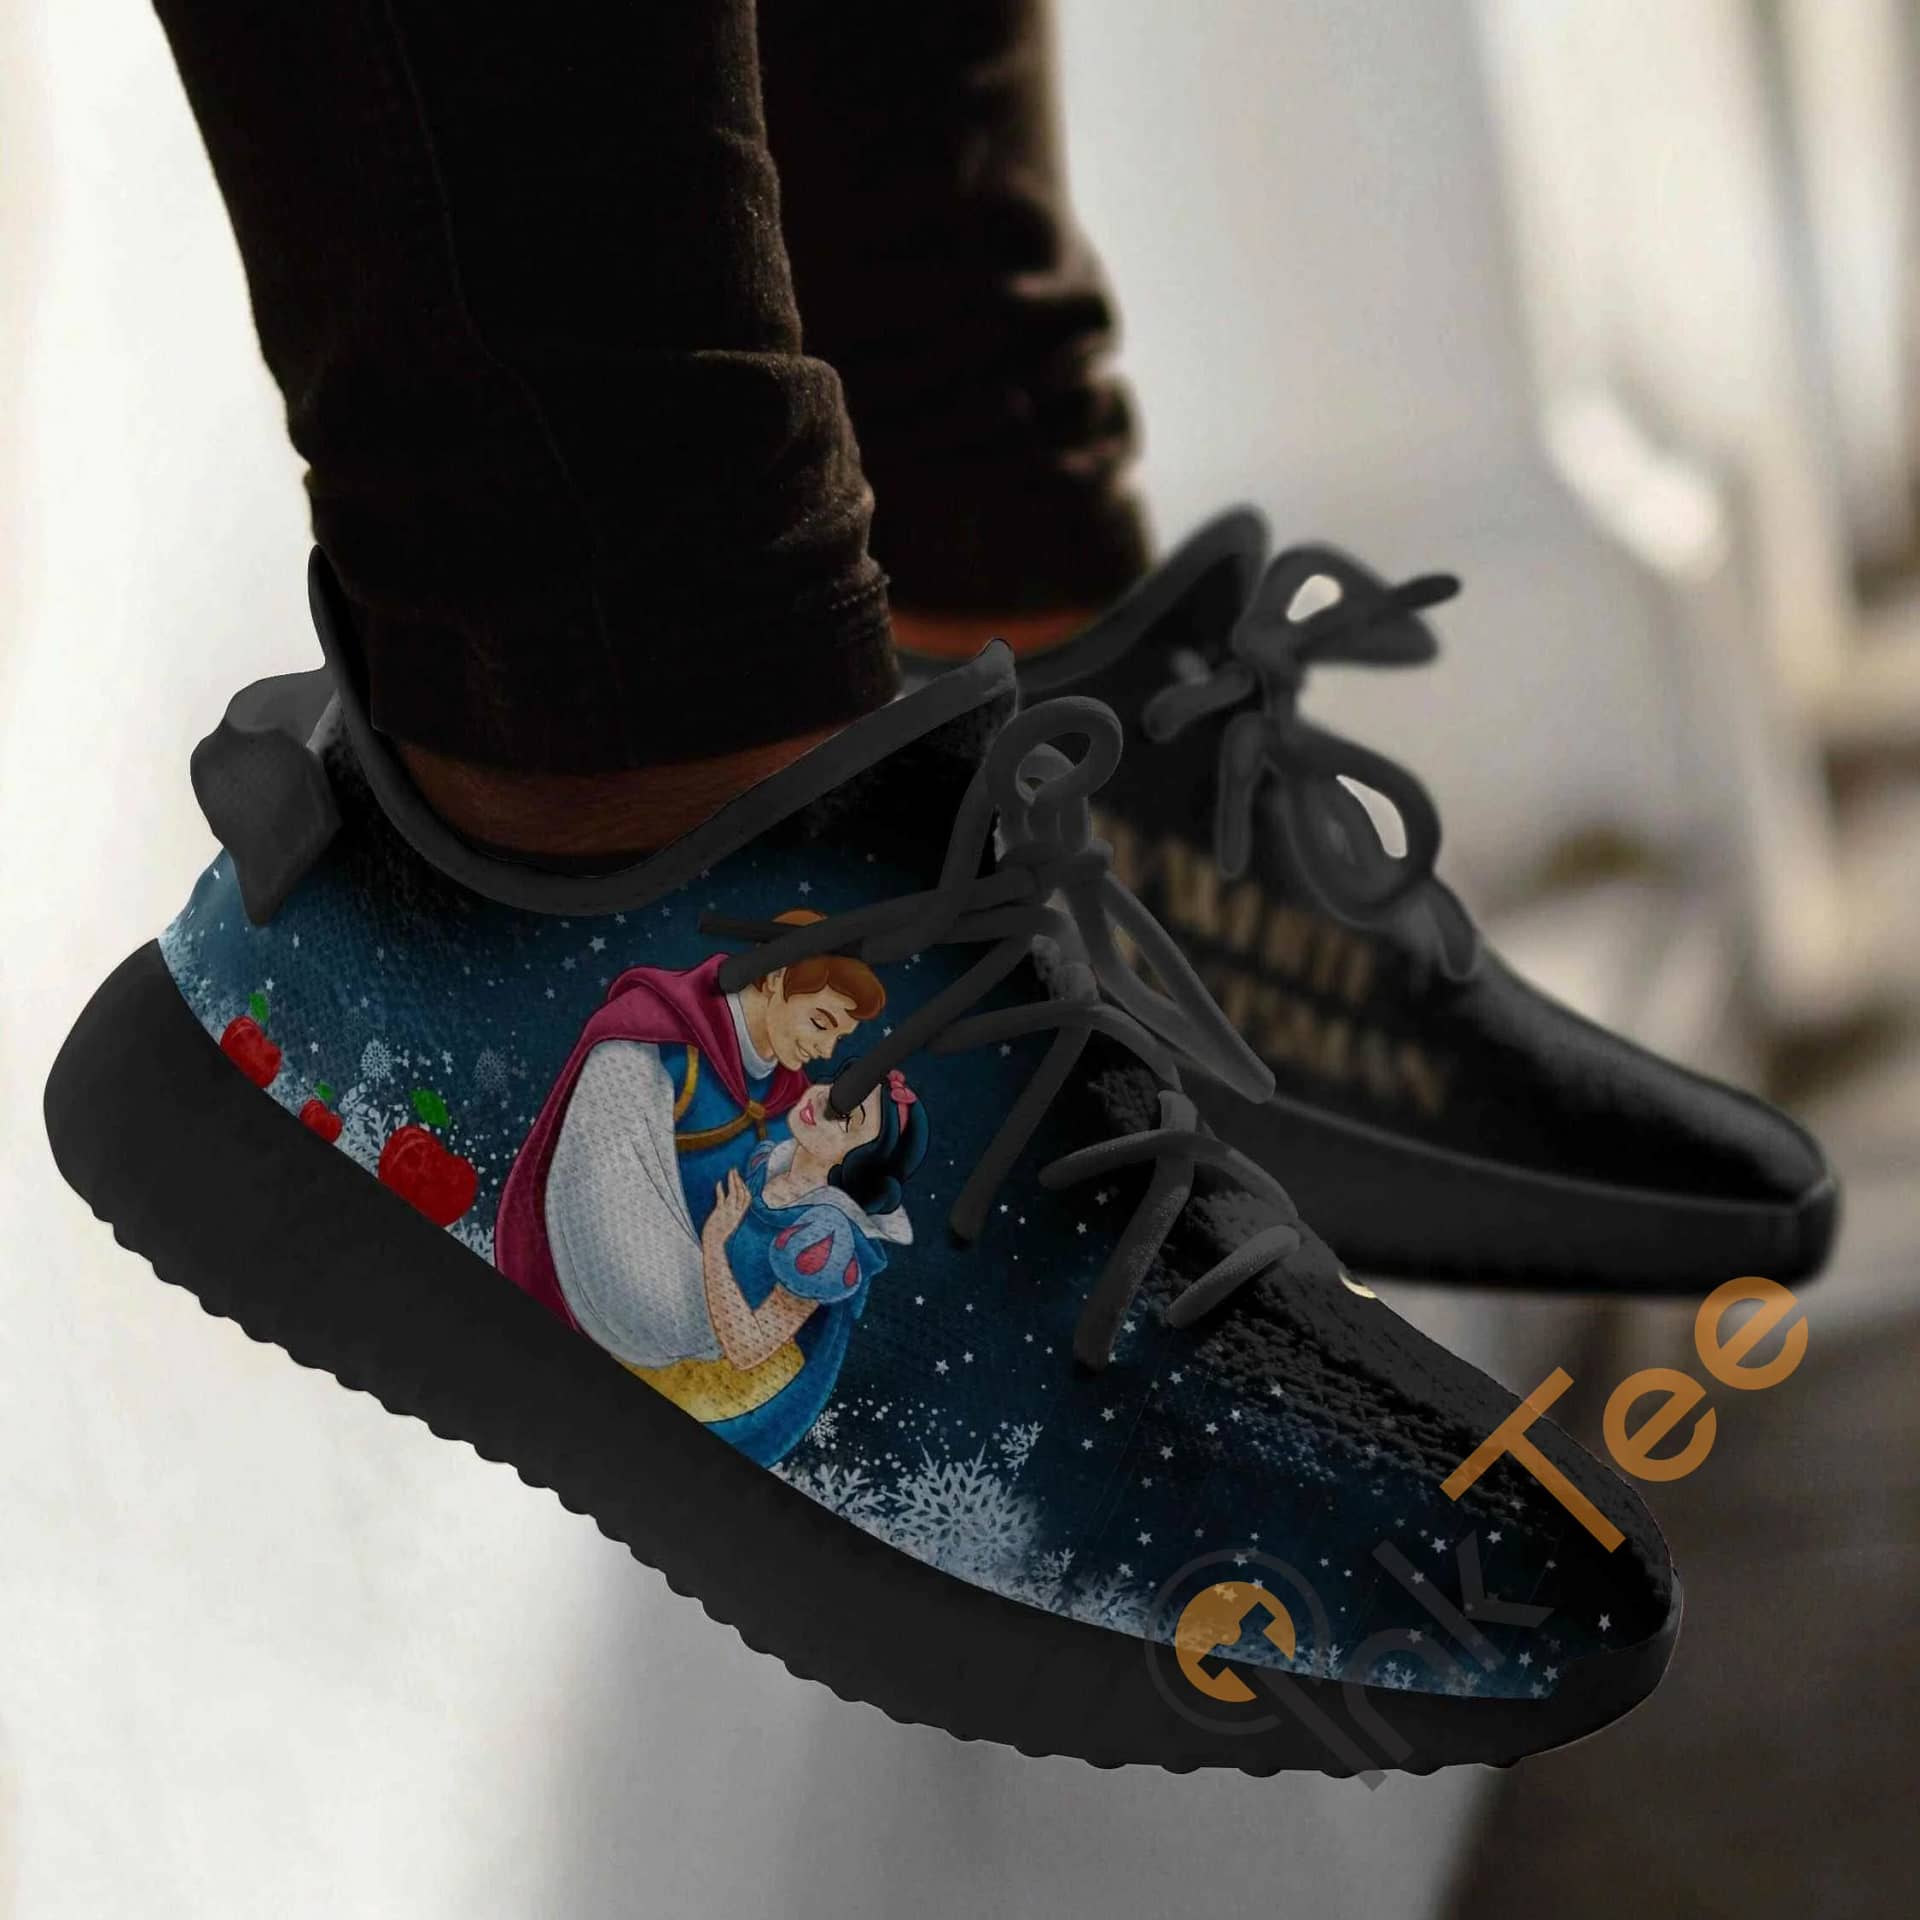 Snow White And The Huntsman Black Edition Amazon Best Selling Yeezy Boost